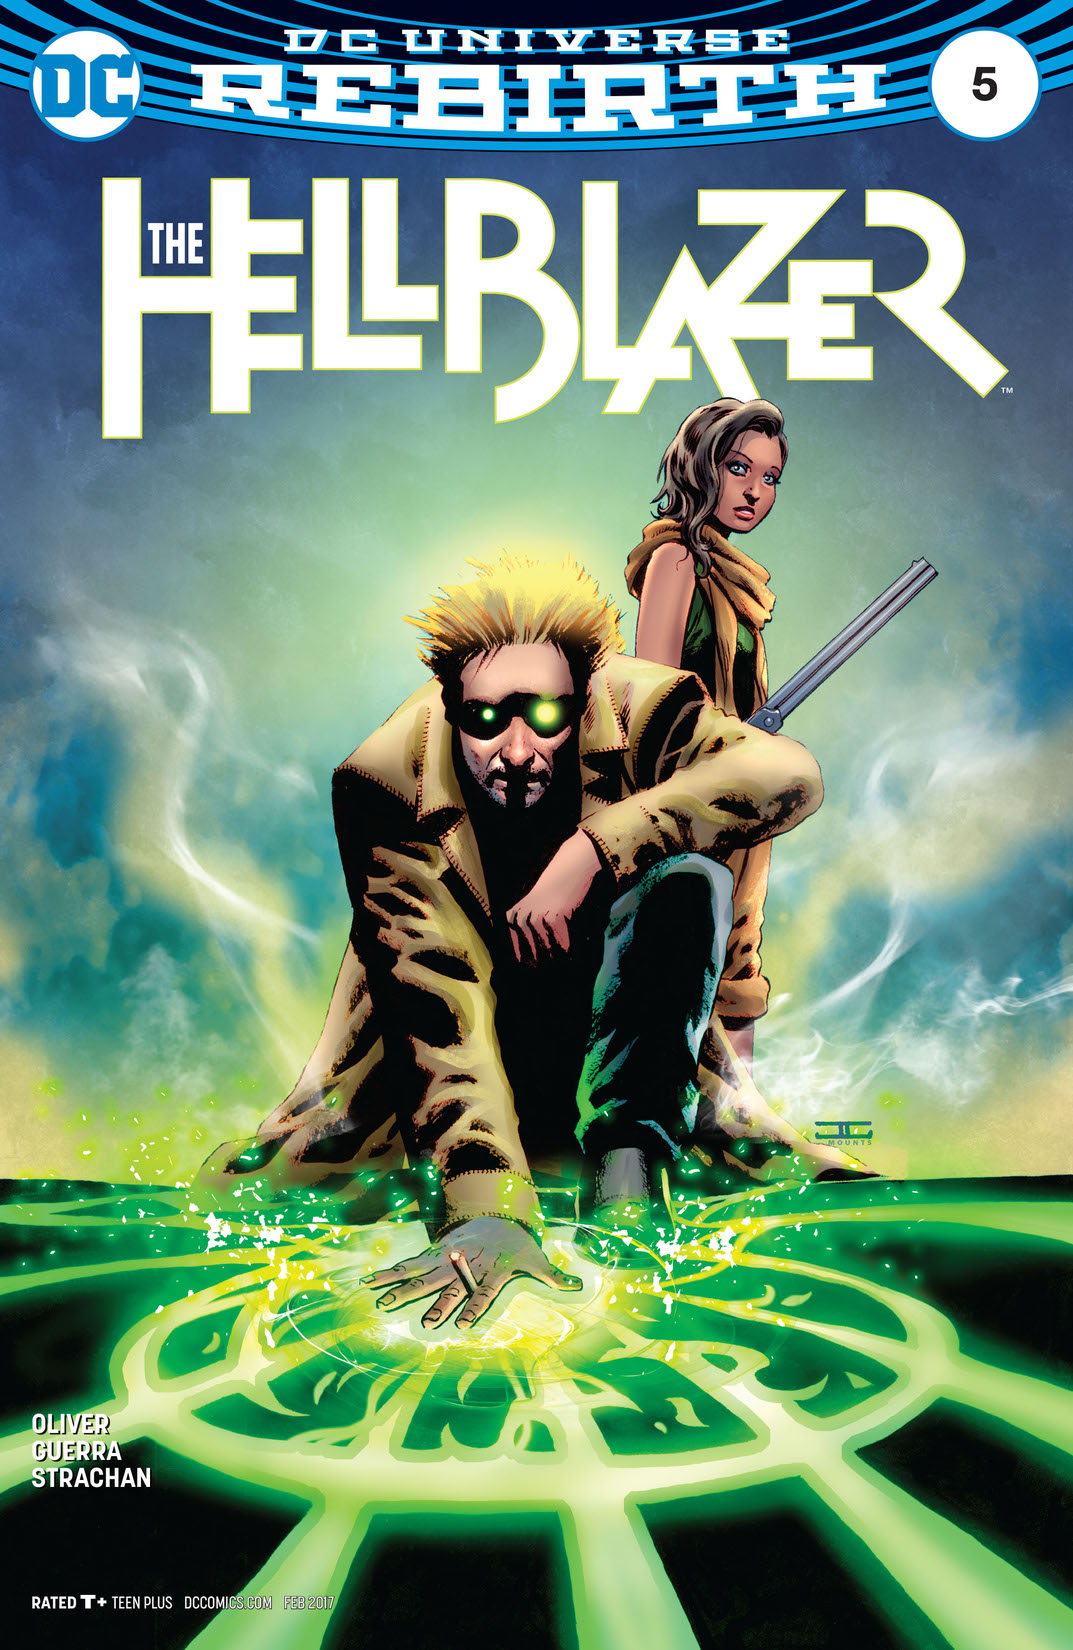 The Hellblazer #5 preview images